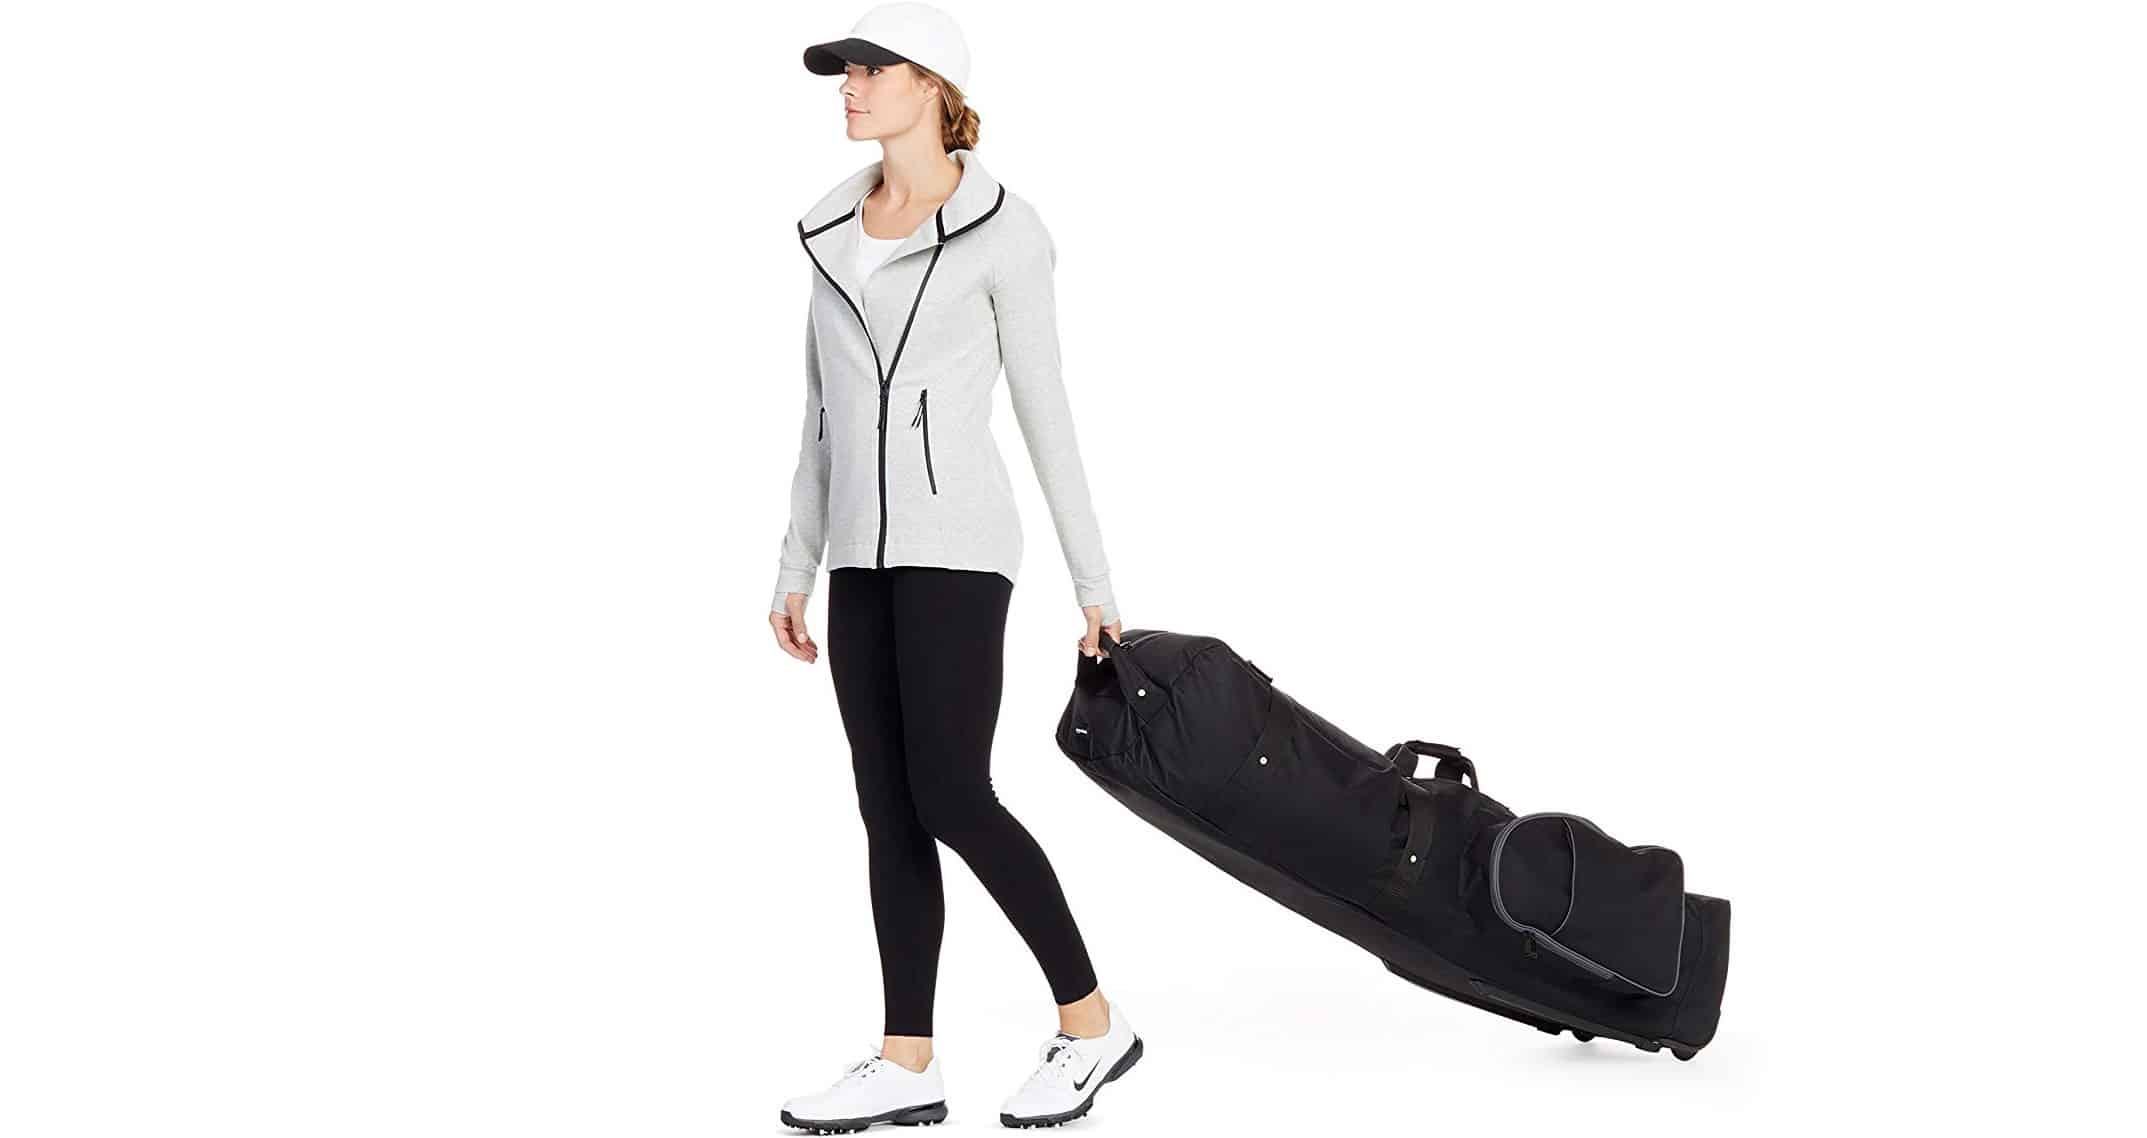 Top 10 Best Golf Travel Bags in 2020 Reviews | Buying Guide